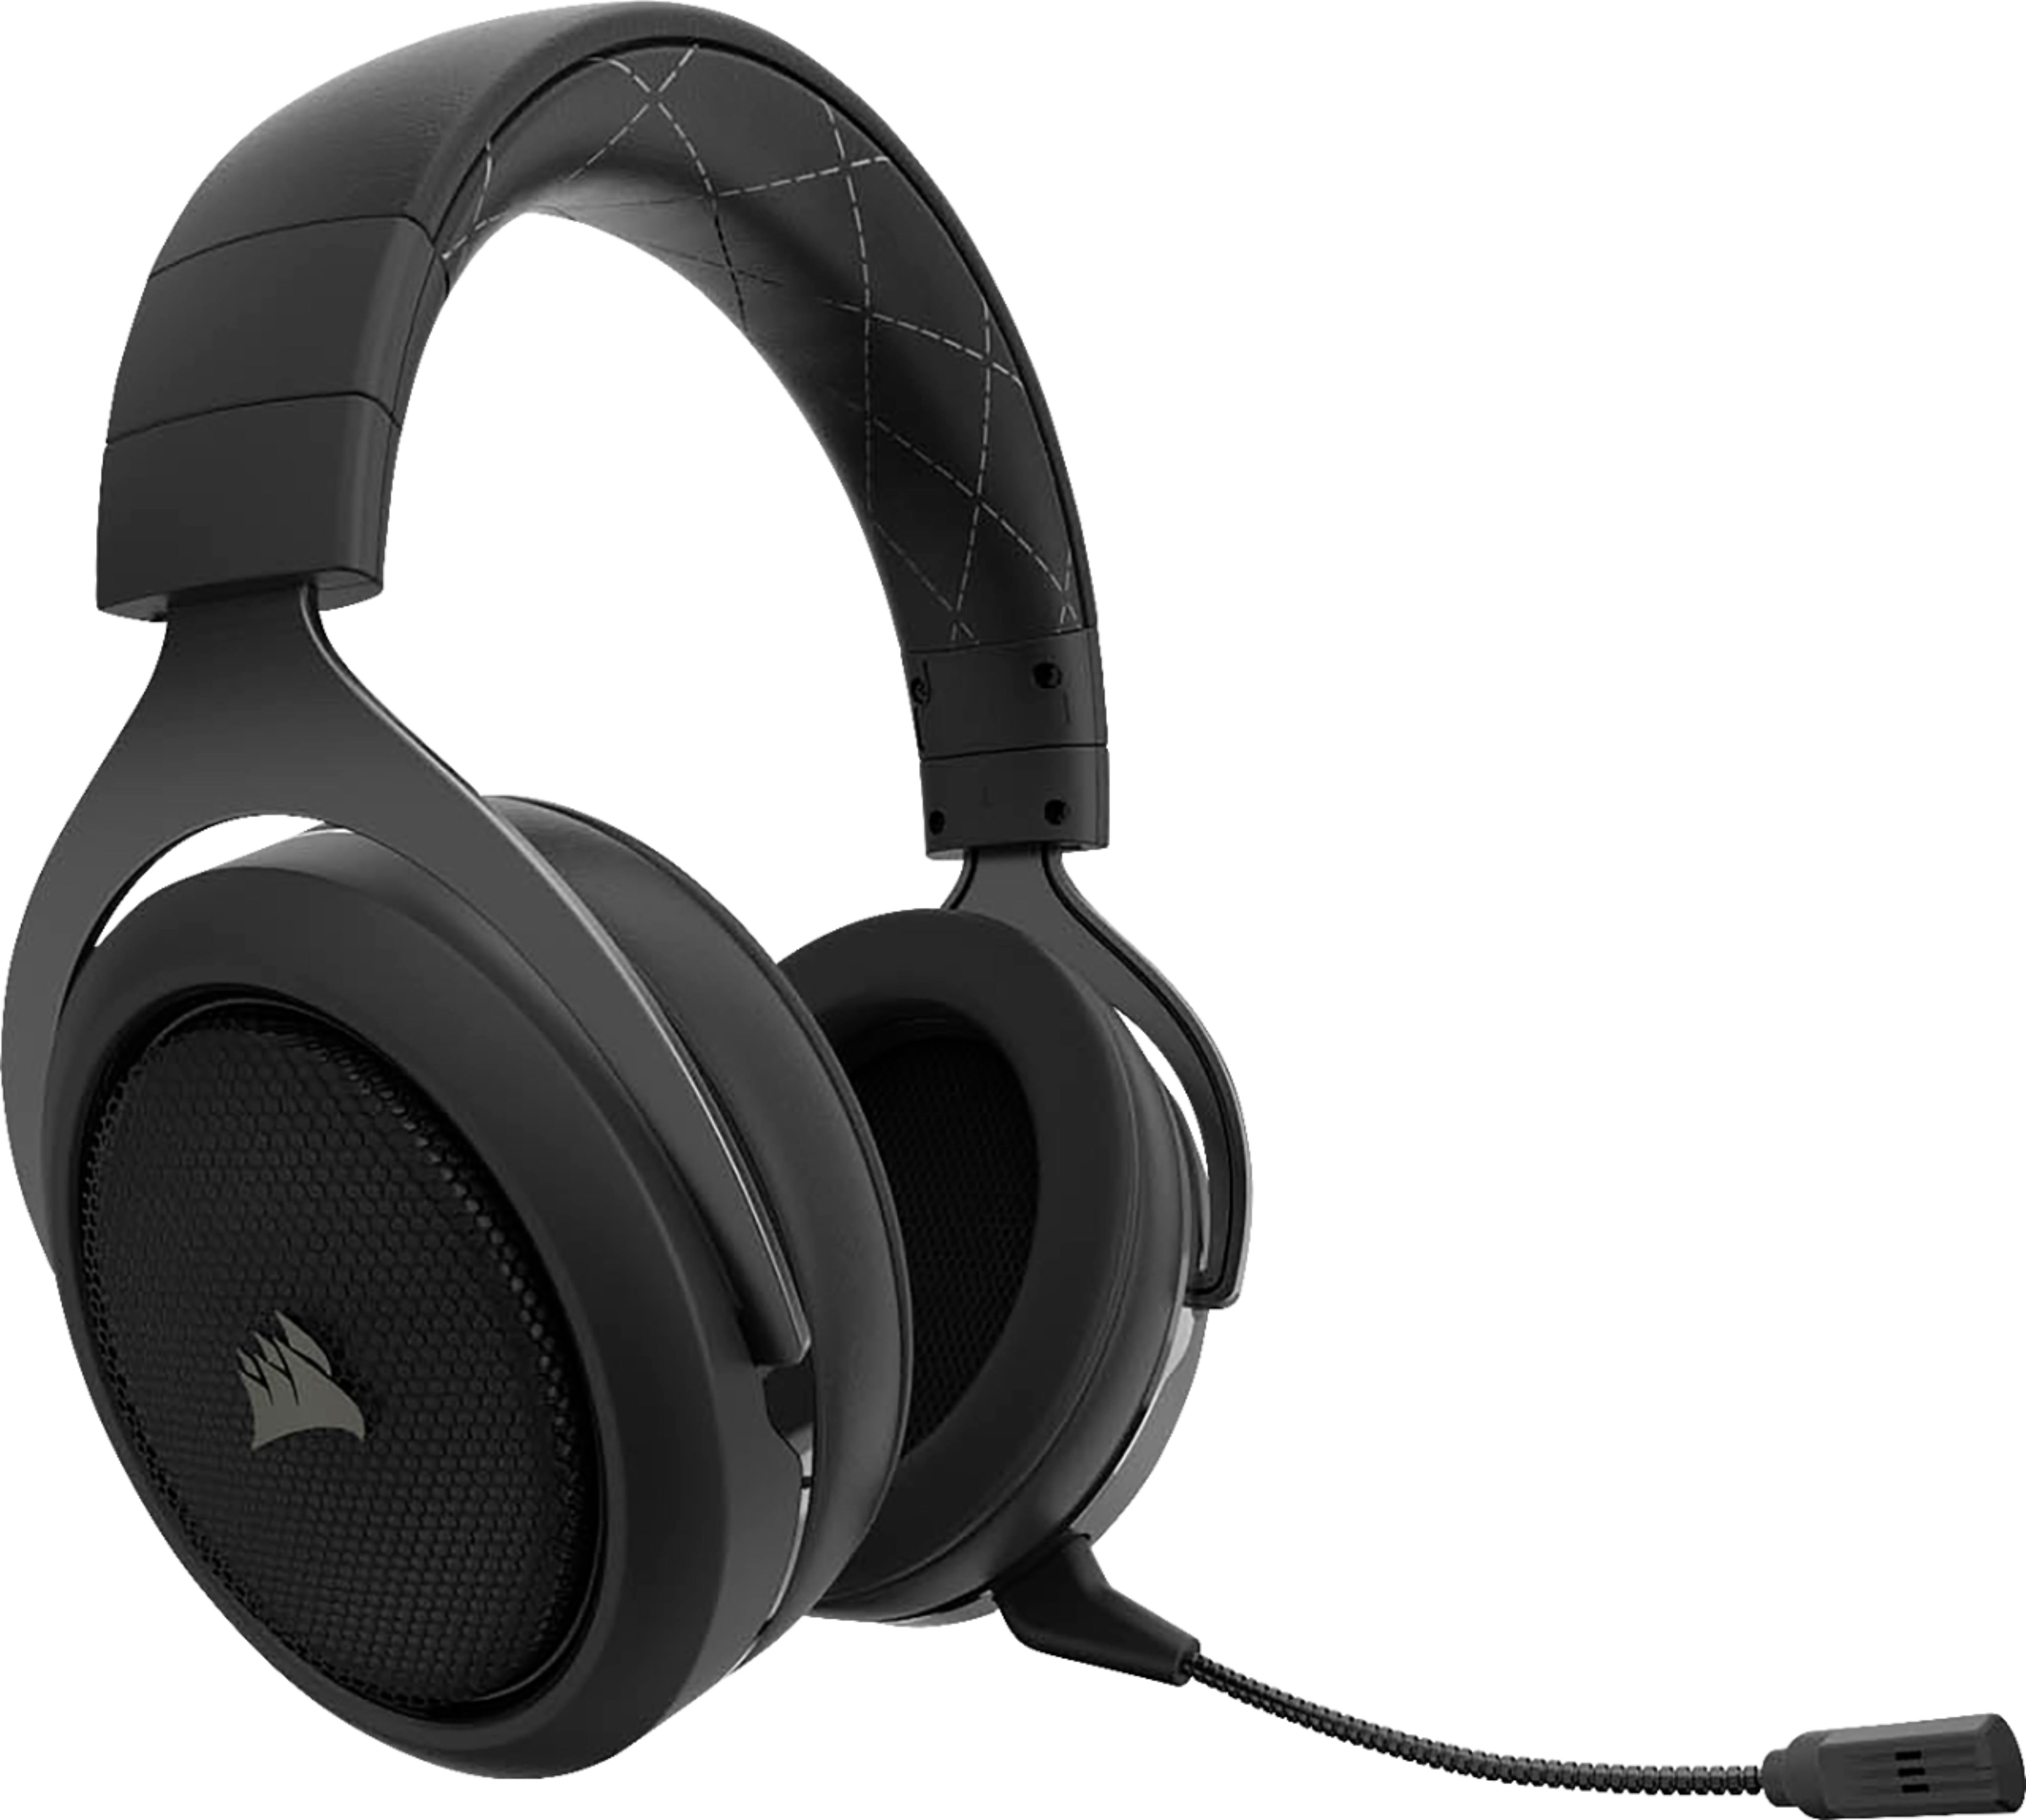 how to use corsair headset on ps4